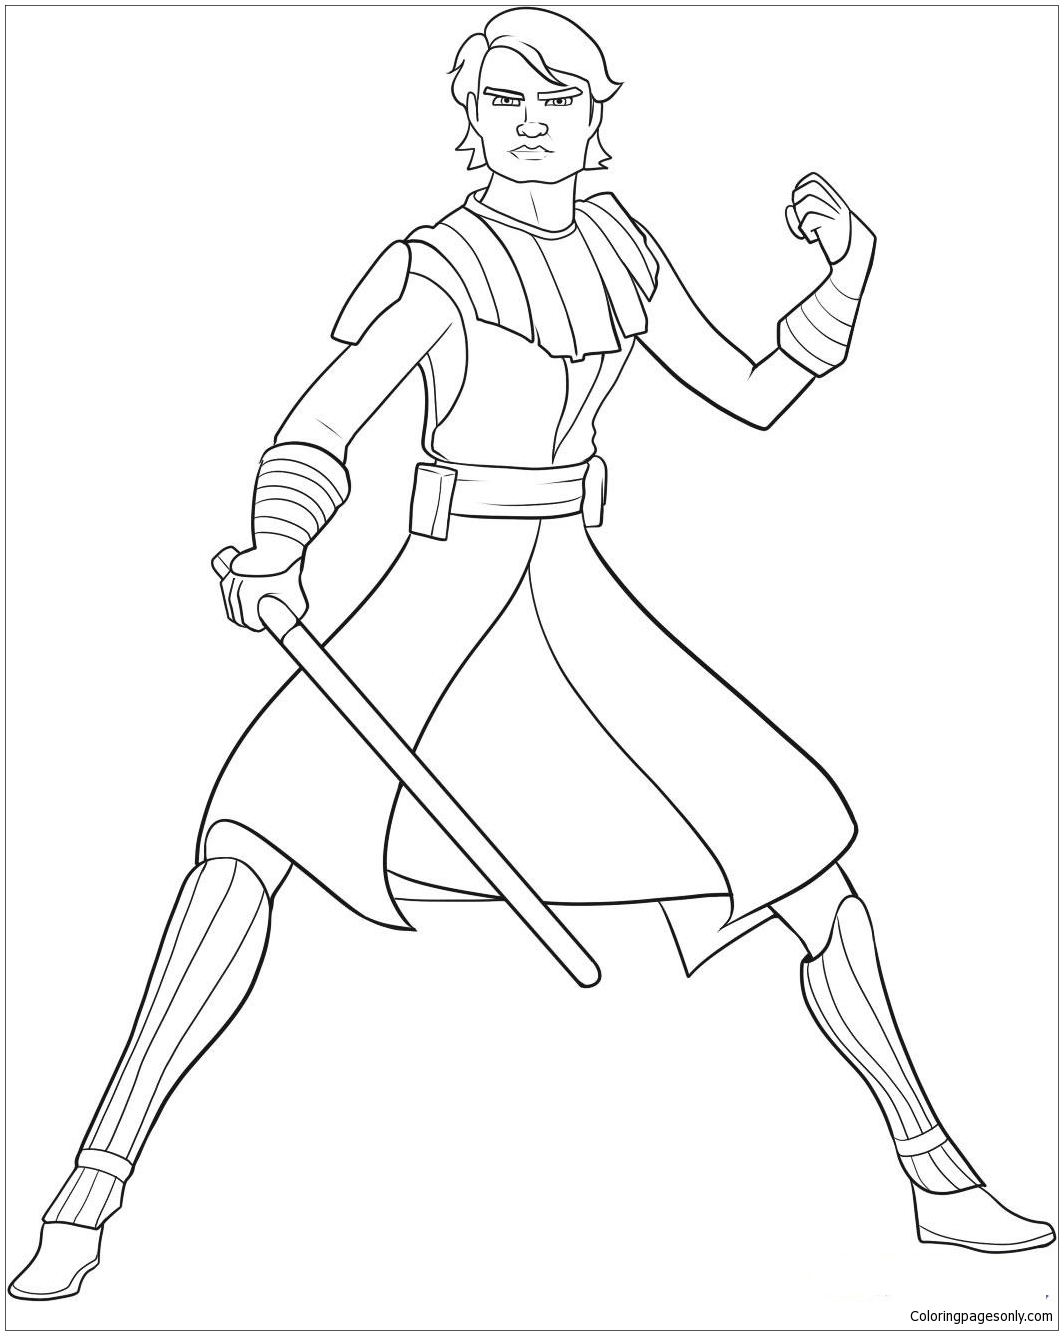 Anakin from Star Wars Coloring Page